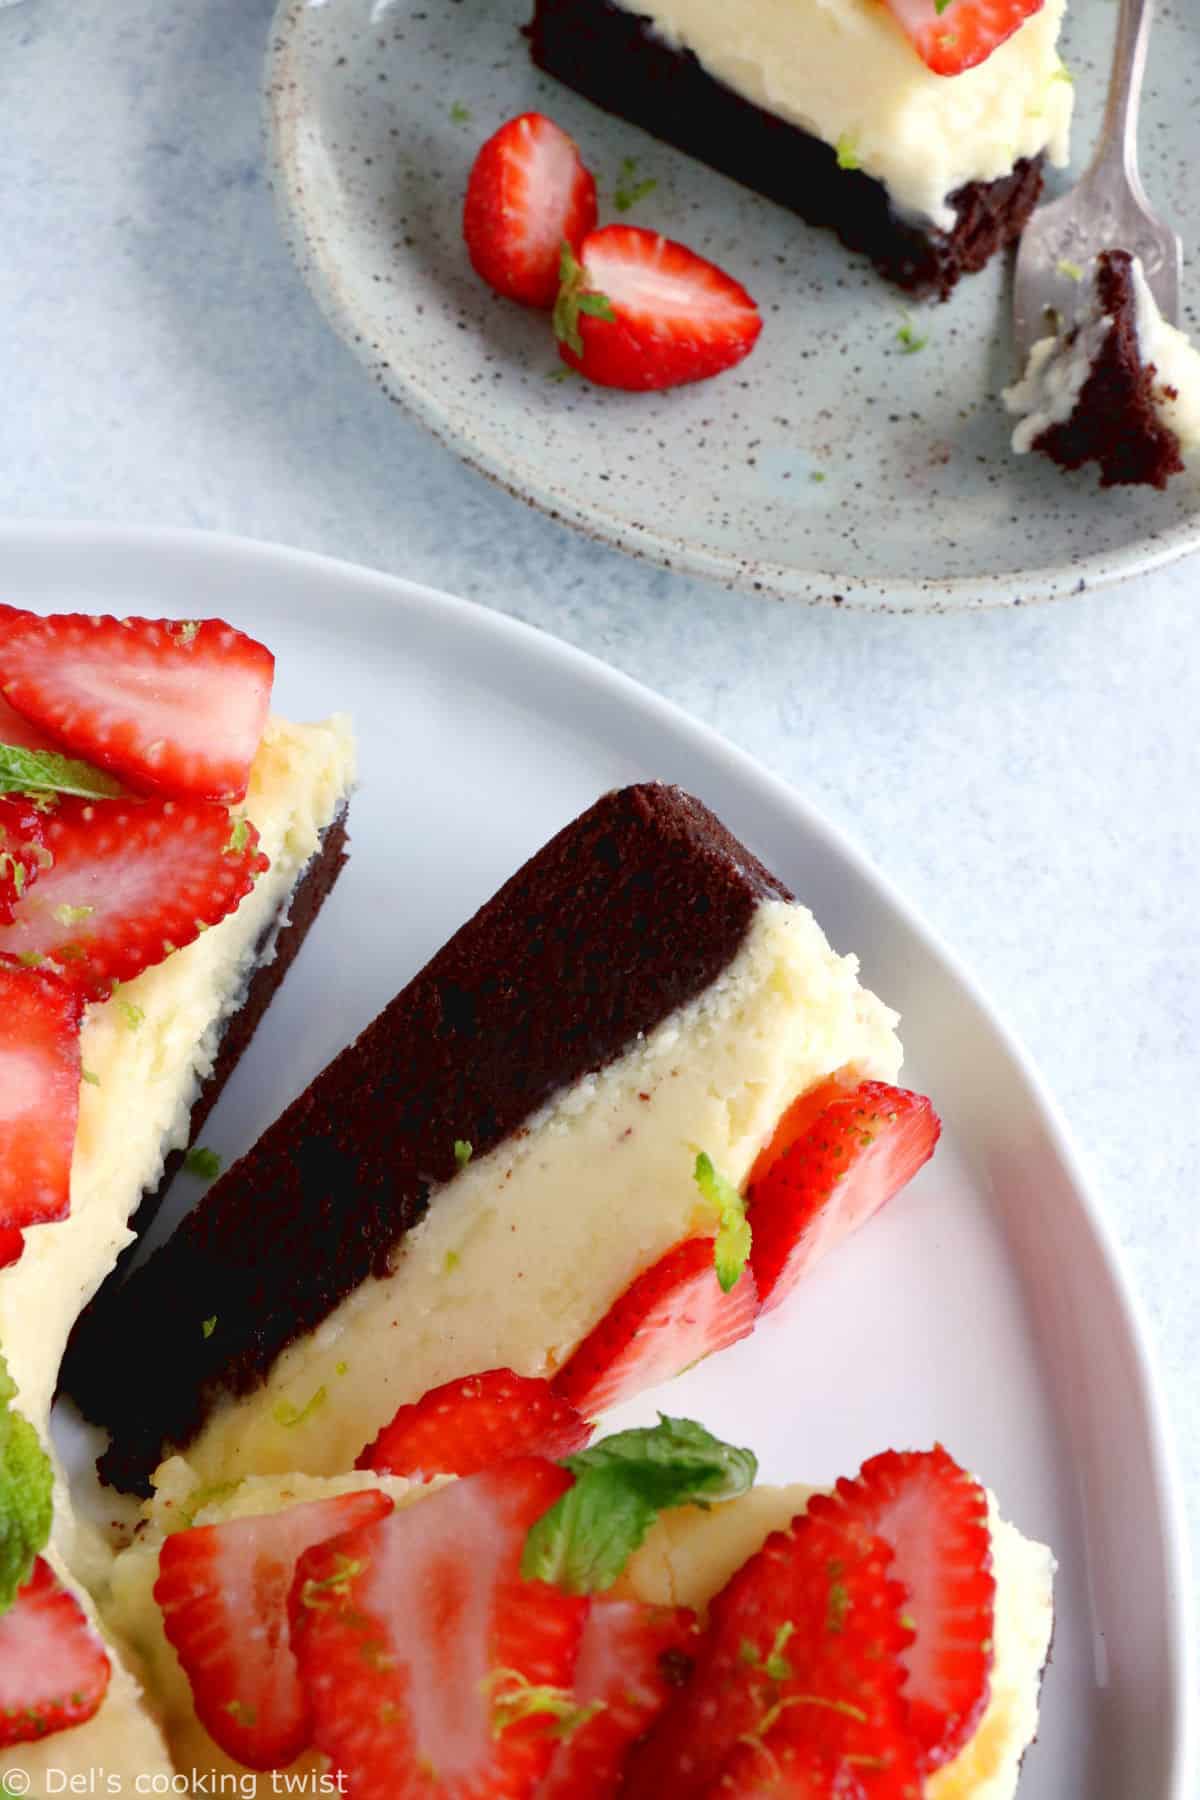 This strawberry white chocolate cheesecake brownies features a rich chocolate base, a creamy white chocolate center, and some fresh berries.